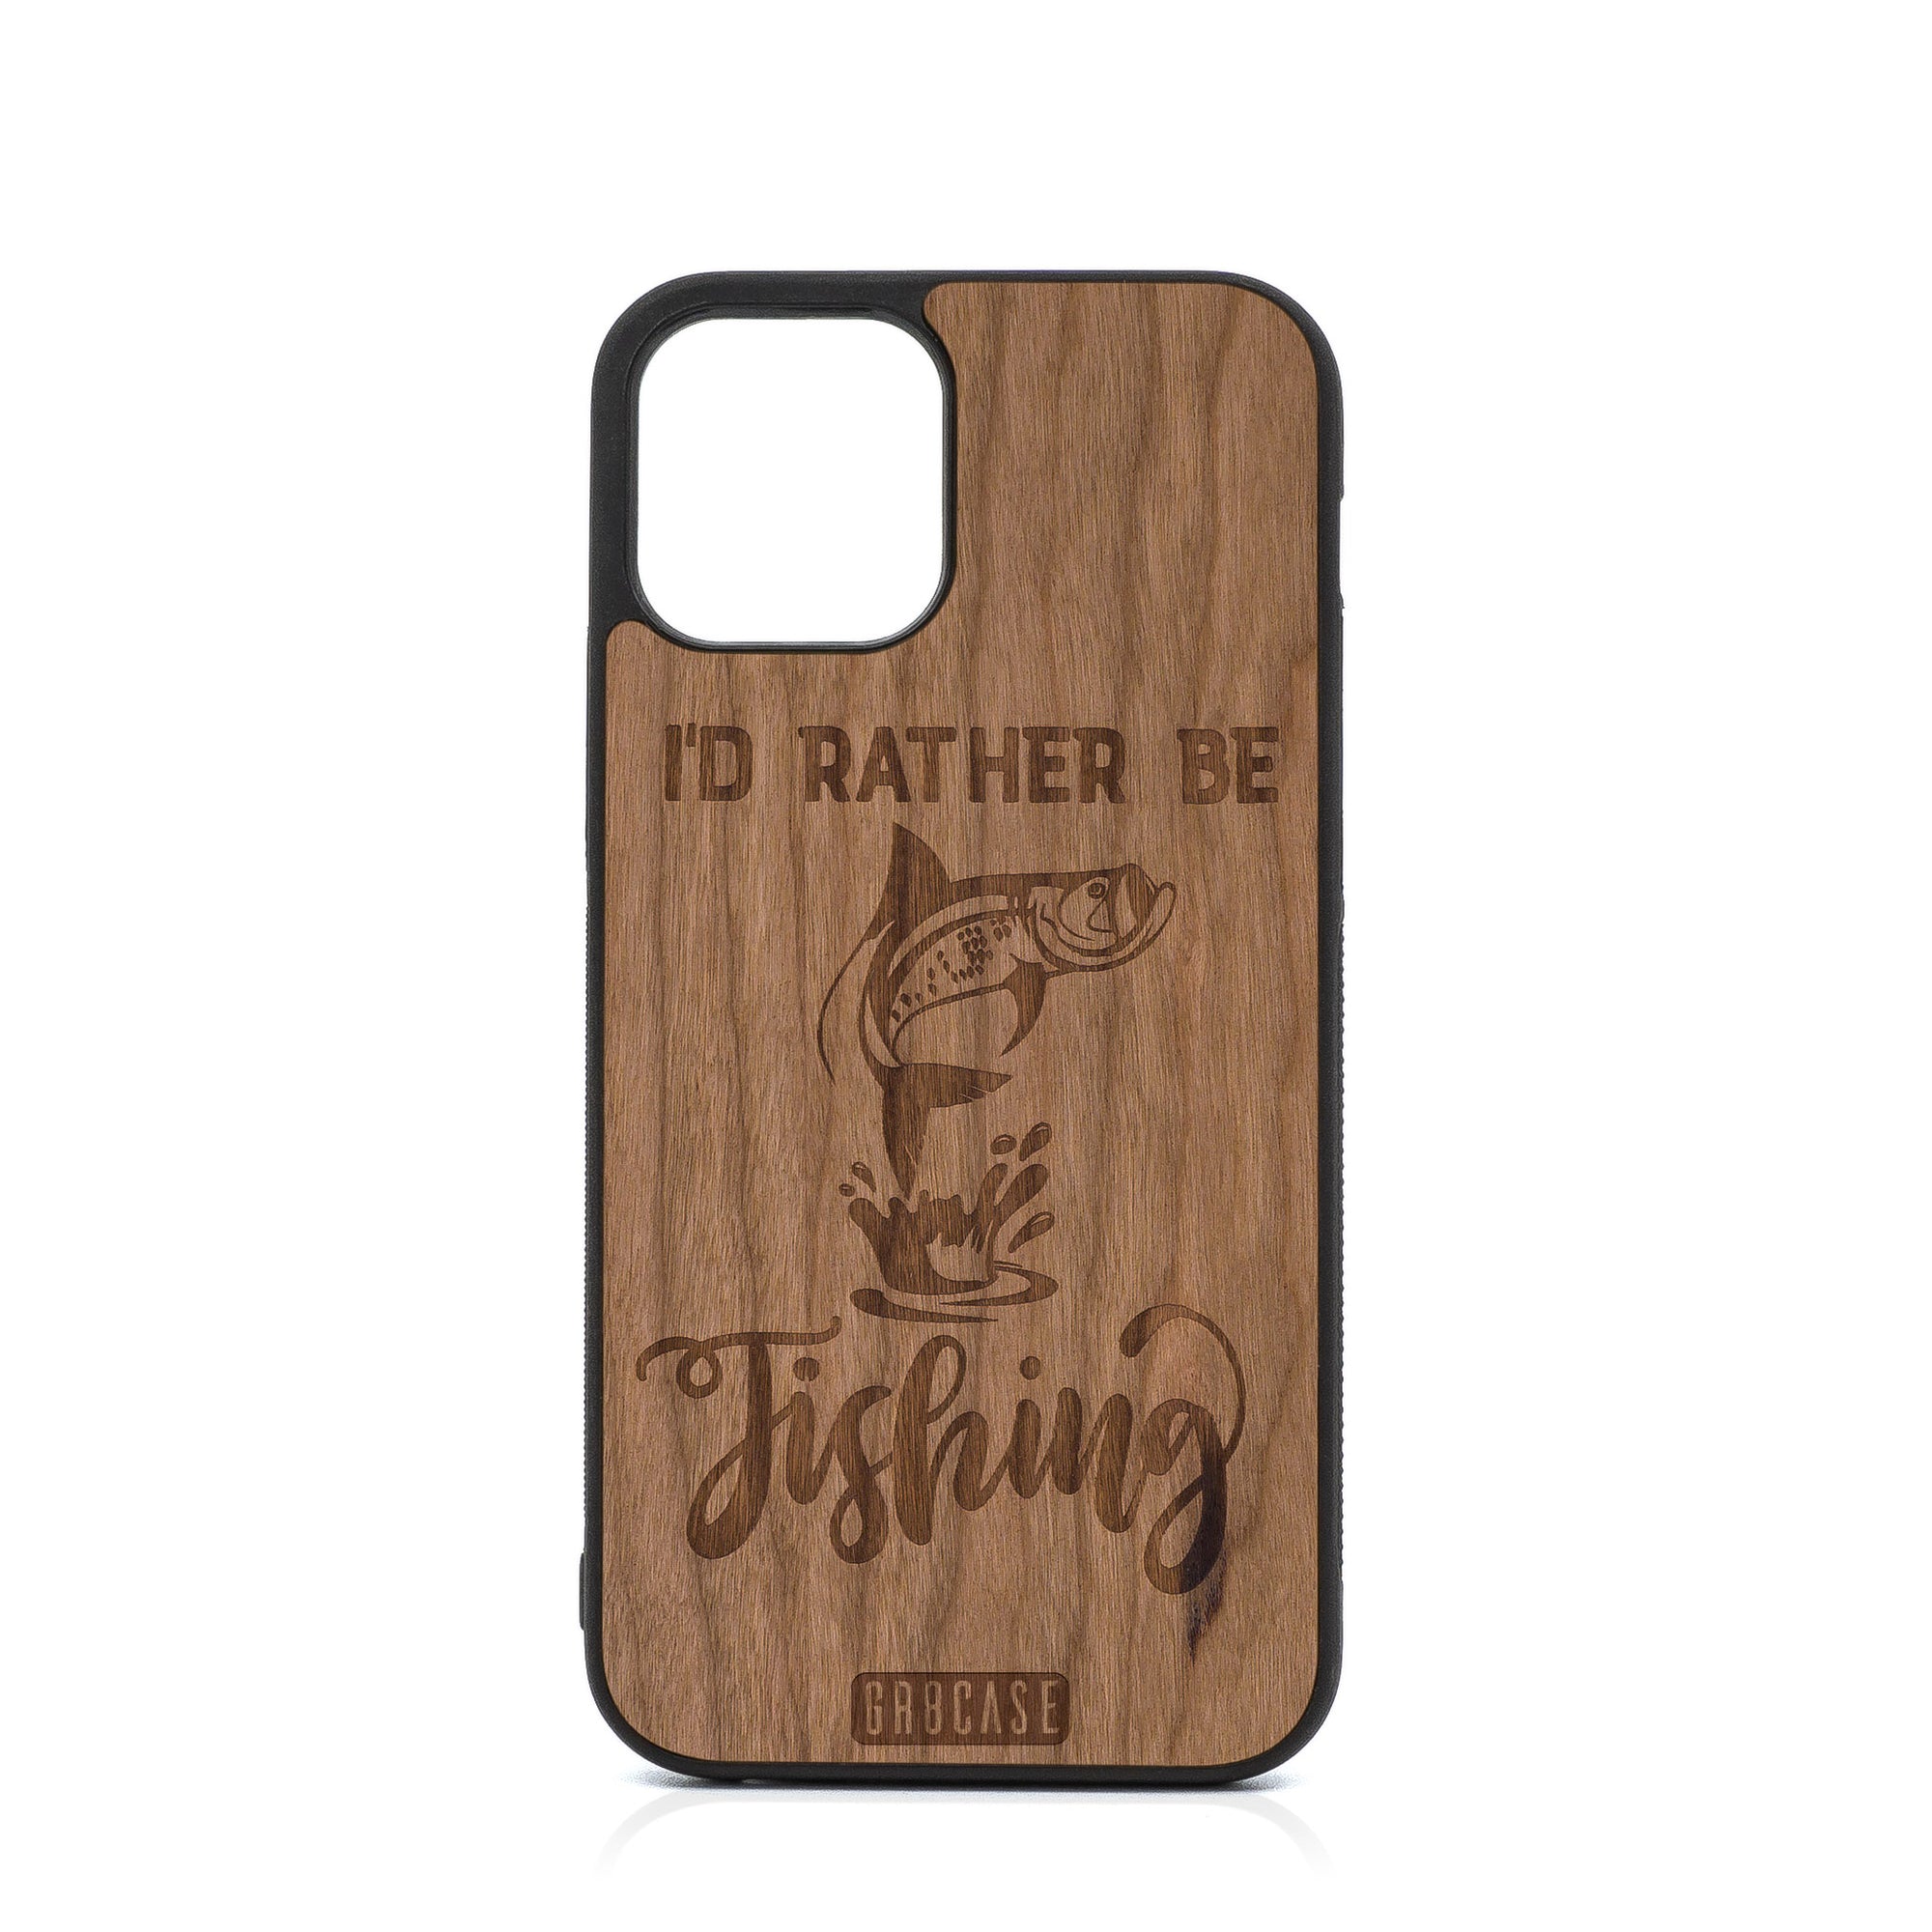 I'D Rather Be Fishing Design Wood Case For iPhone 12